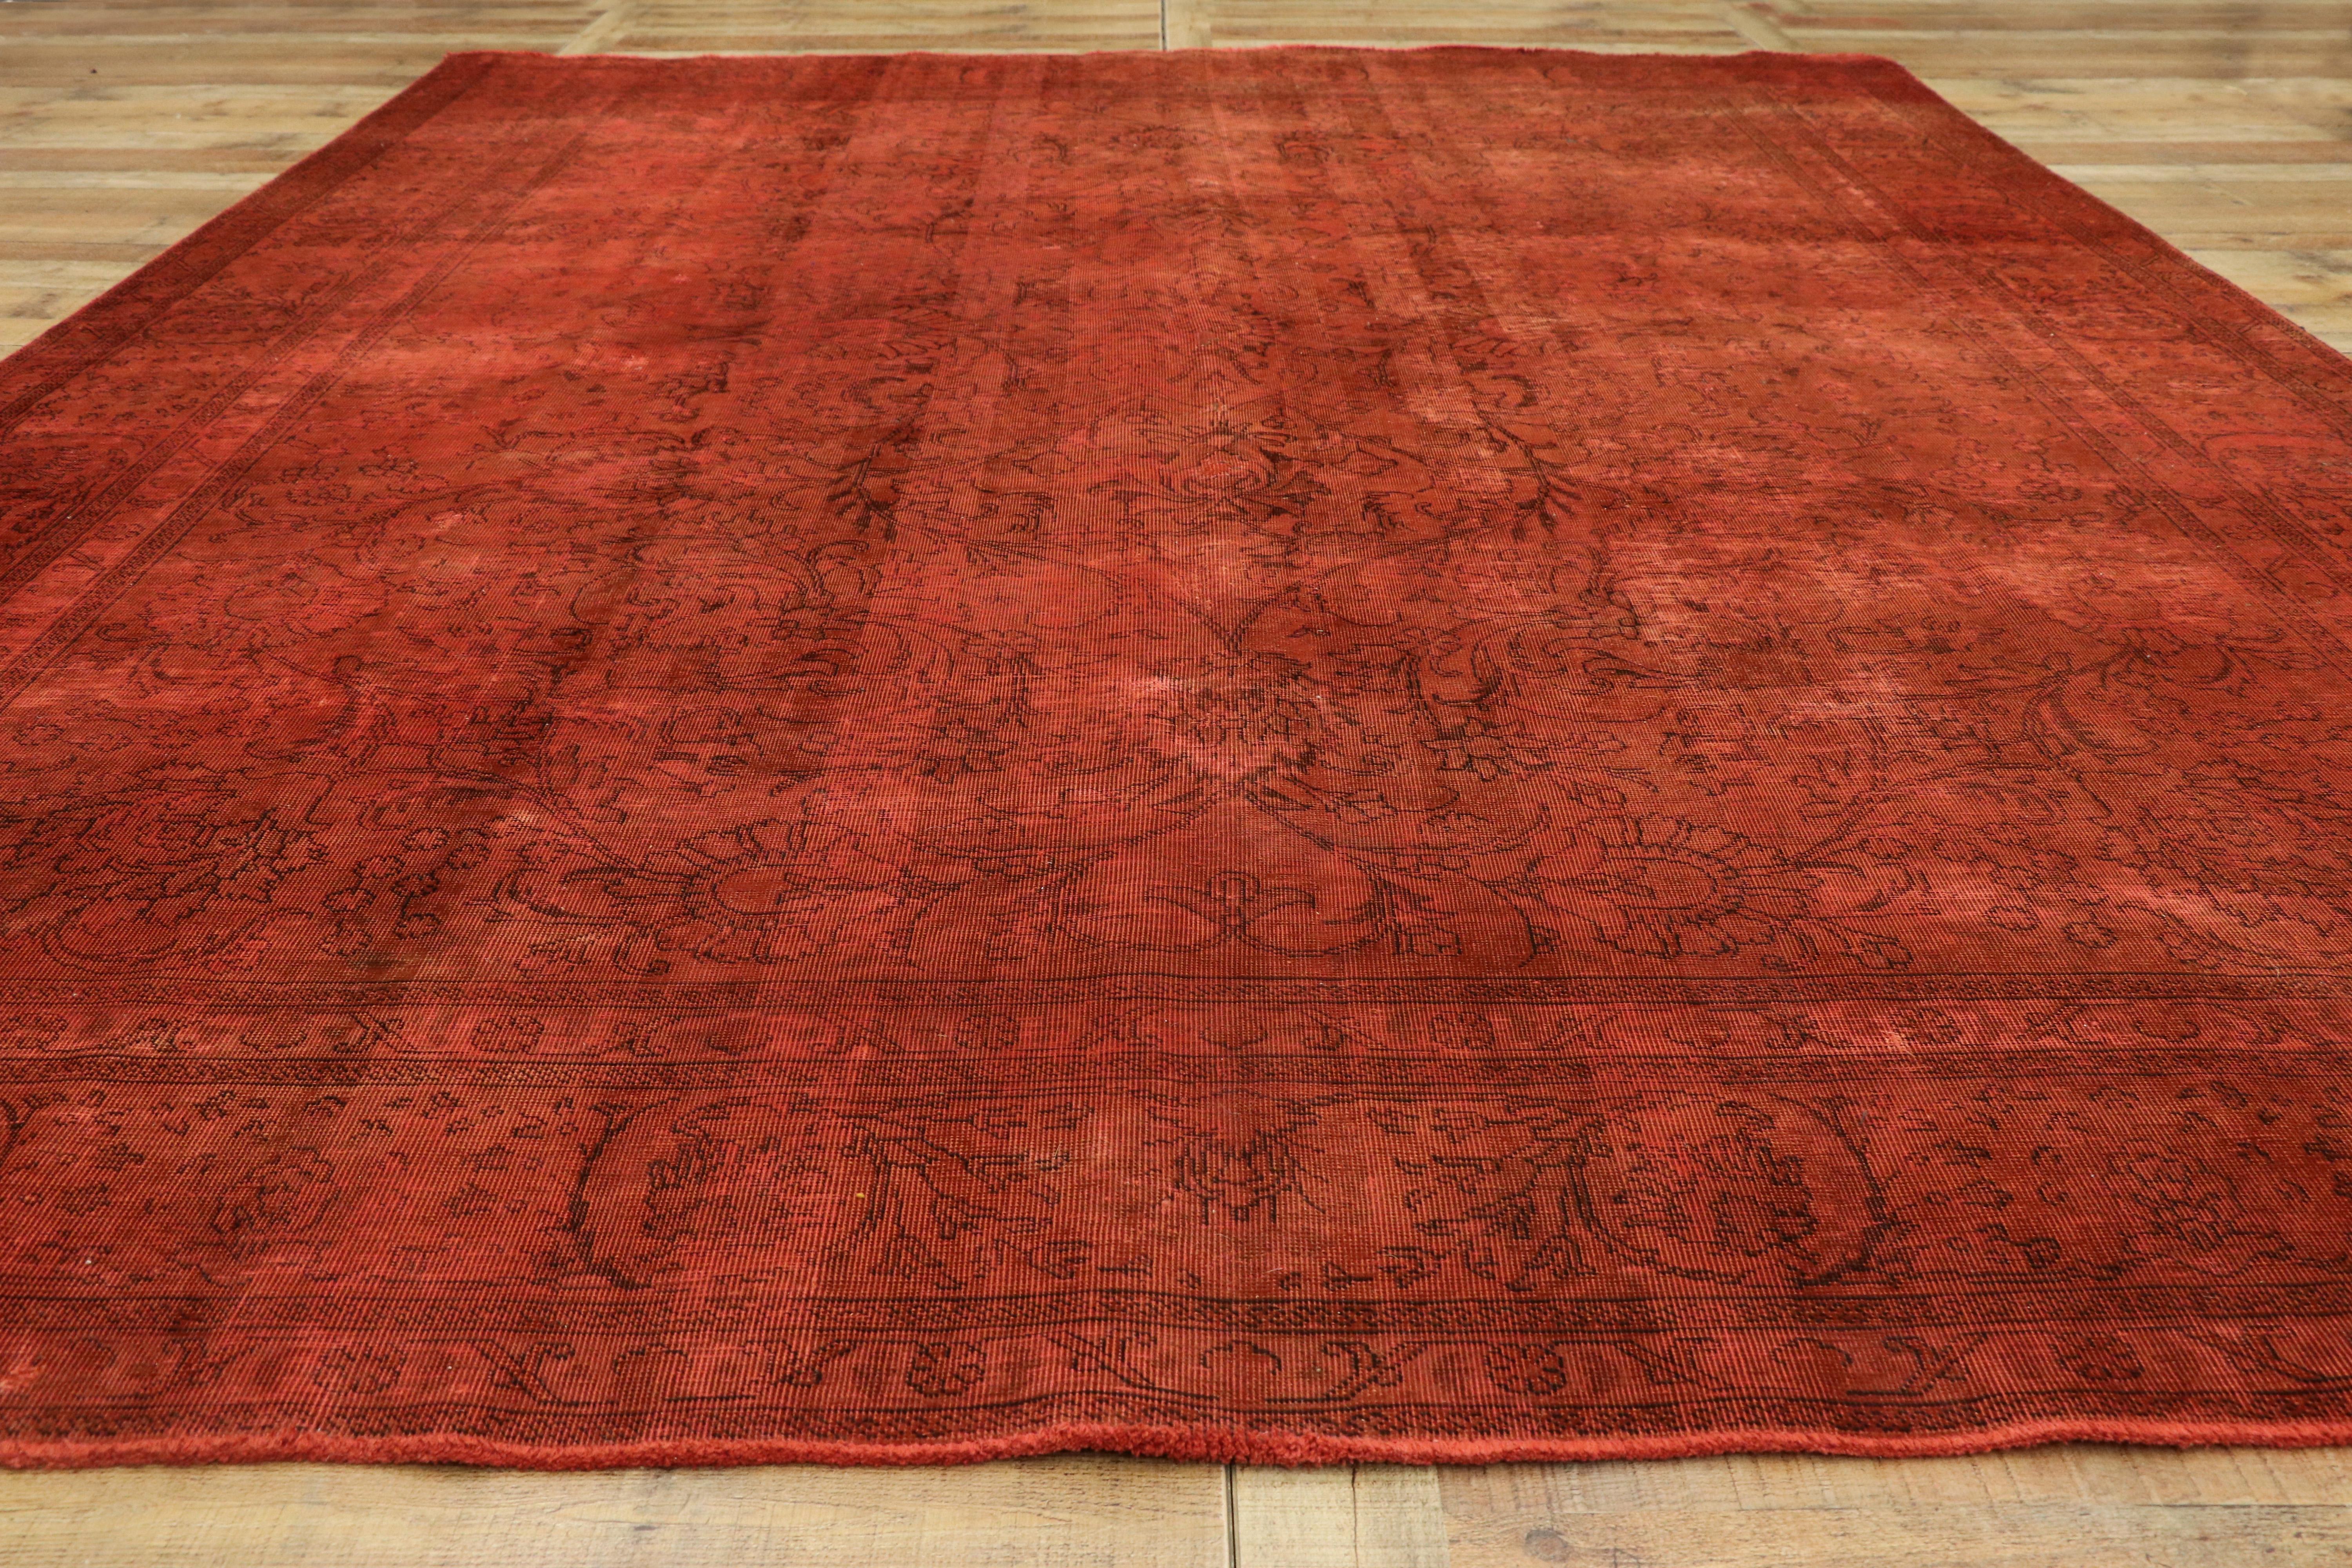 20th Century Distressed Overdyed Red Persian Area Rug with Luxe Industrial Style